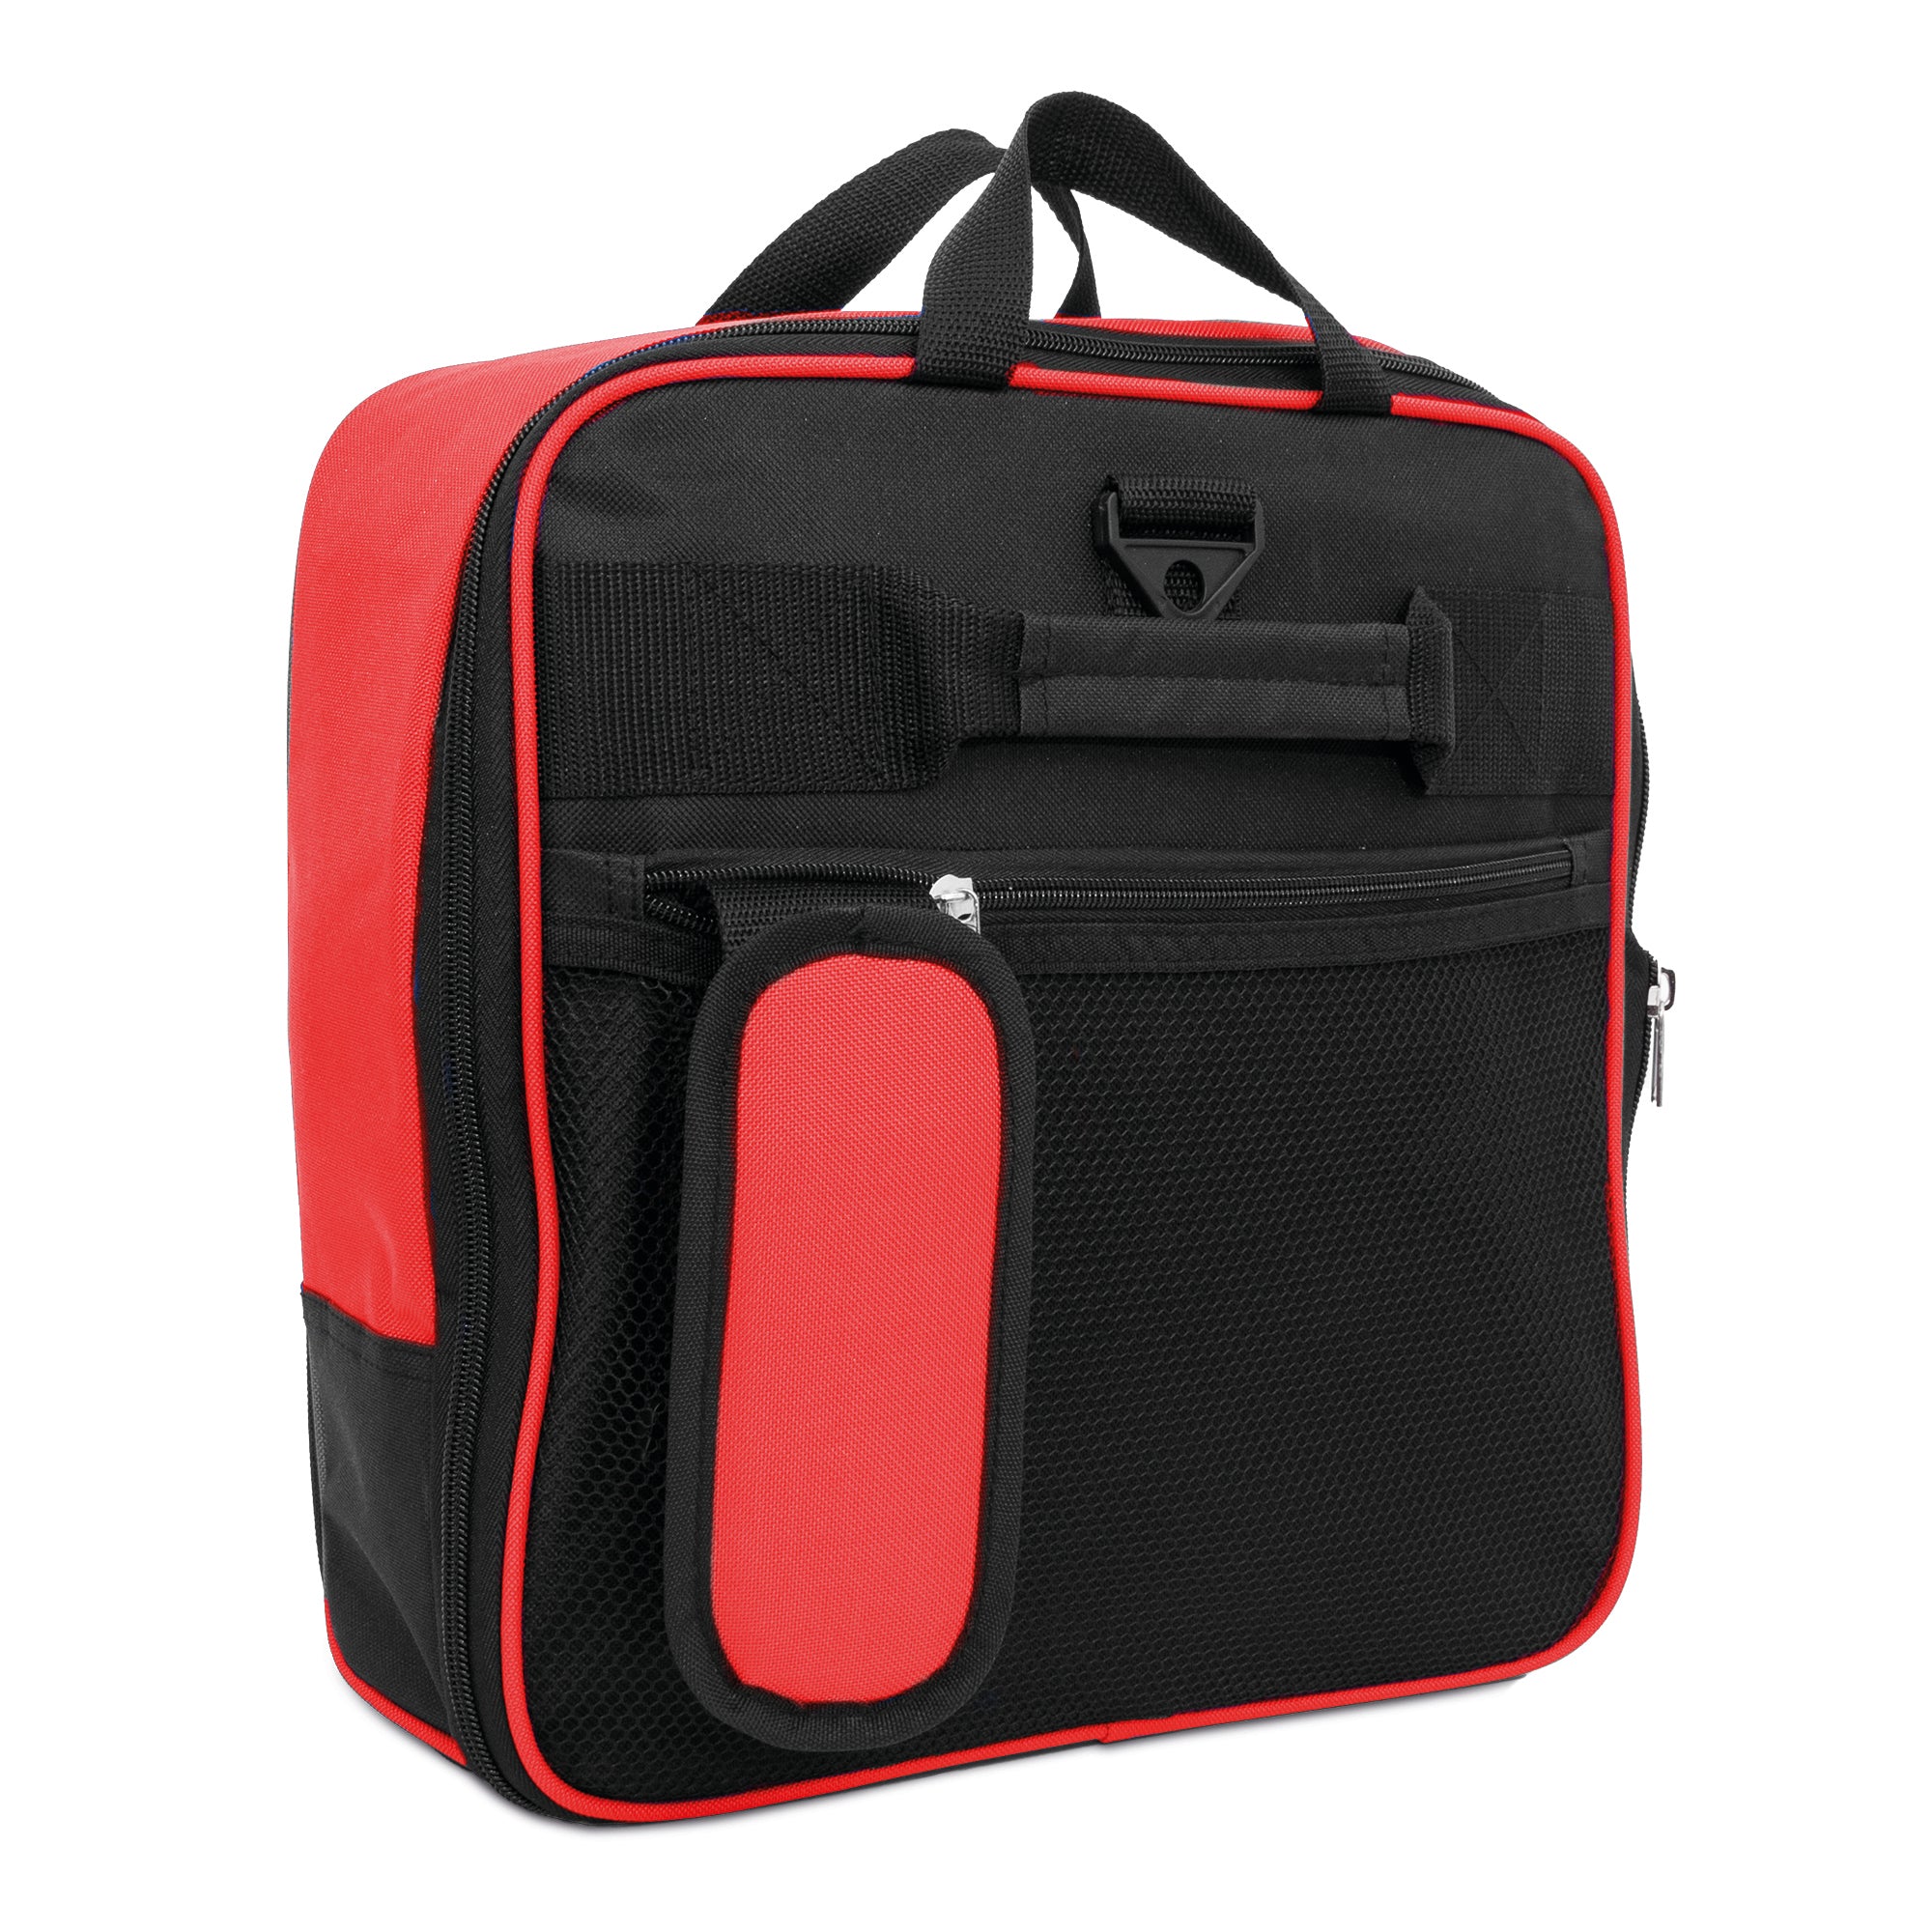 Large Travel Bag With Wheels (Red) - iN Travel - DSL